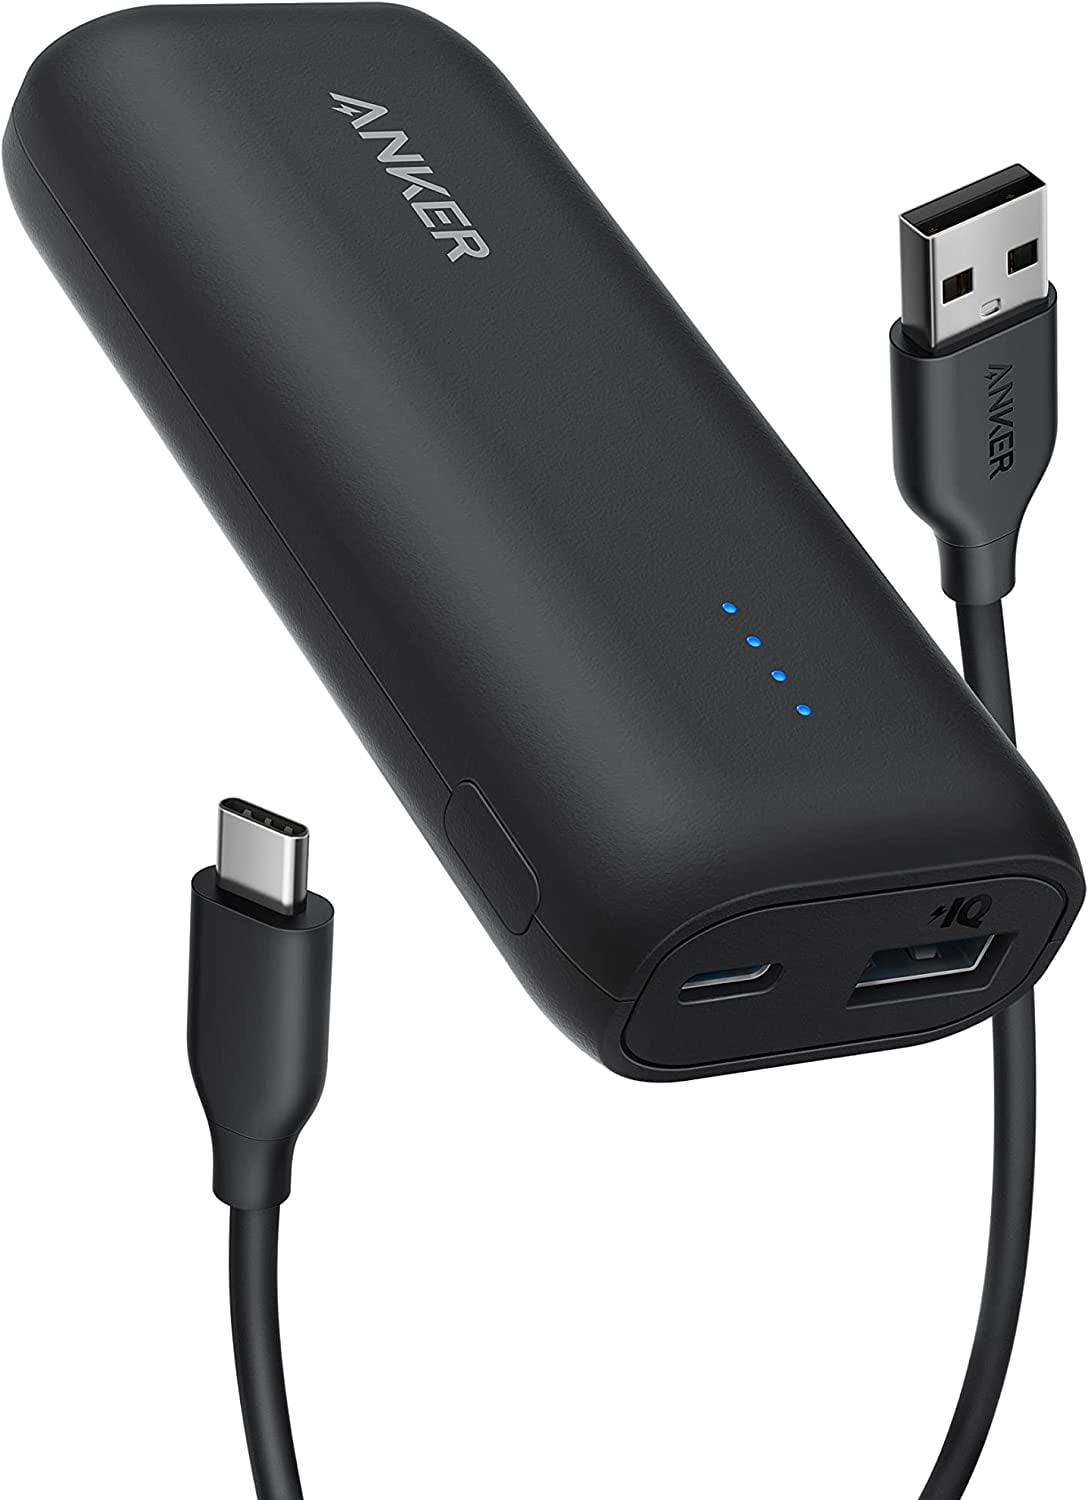 Anker Prime Power Bank 12000mAh 2-Port Portable Charger with 130W Output  Spare Battery Portable Power Bank Large Capacity